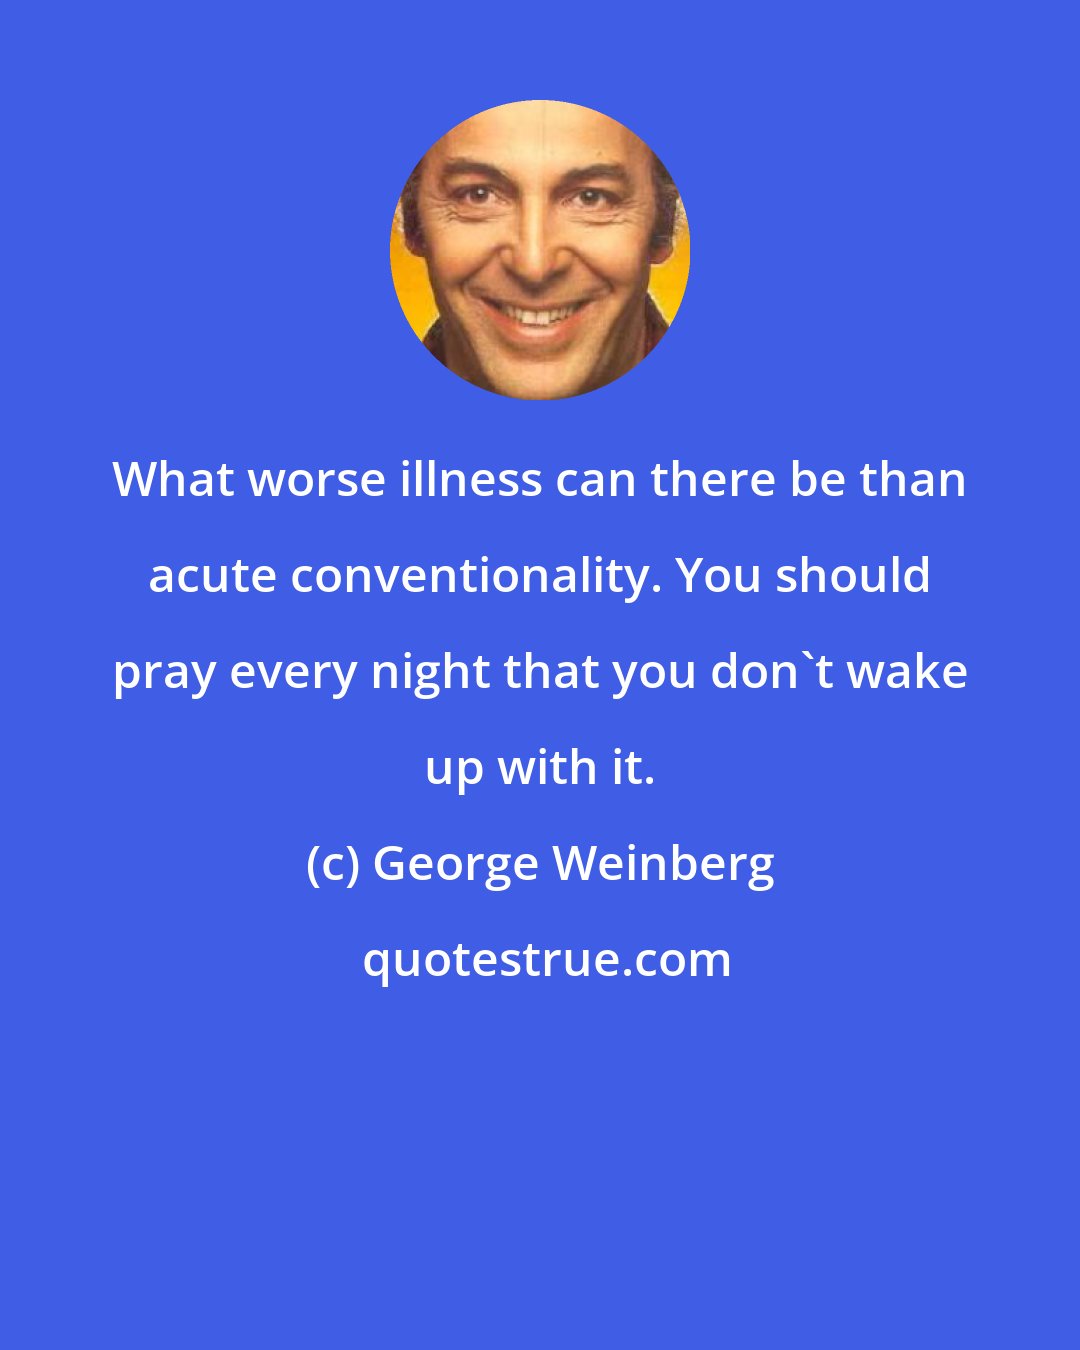 George Weinberg: What worse illness can there be than acute conventionality. You should pray every night that you don't wake up with it.